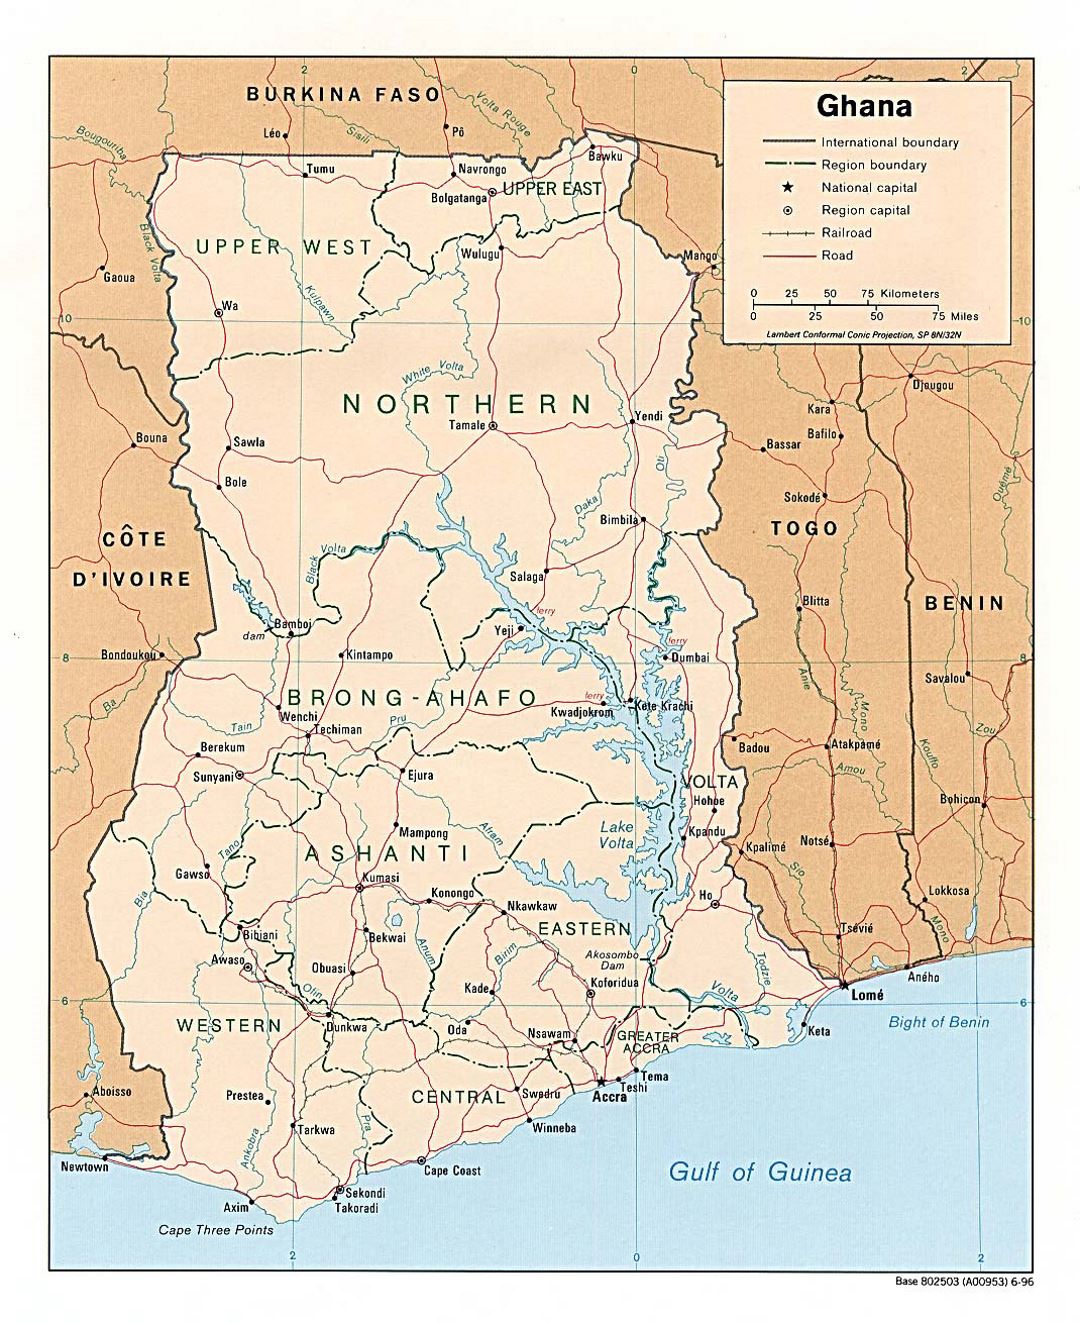 Detailed political and administrative map of Ghana with roads, railroads and major cities - 1996